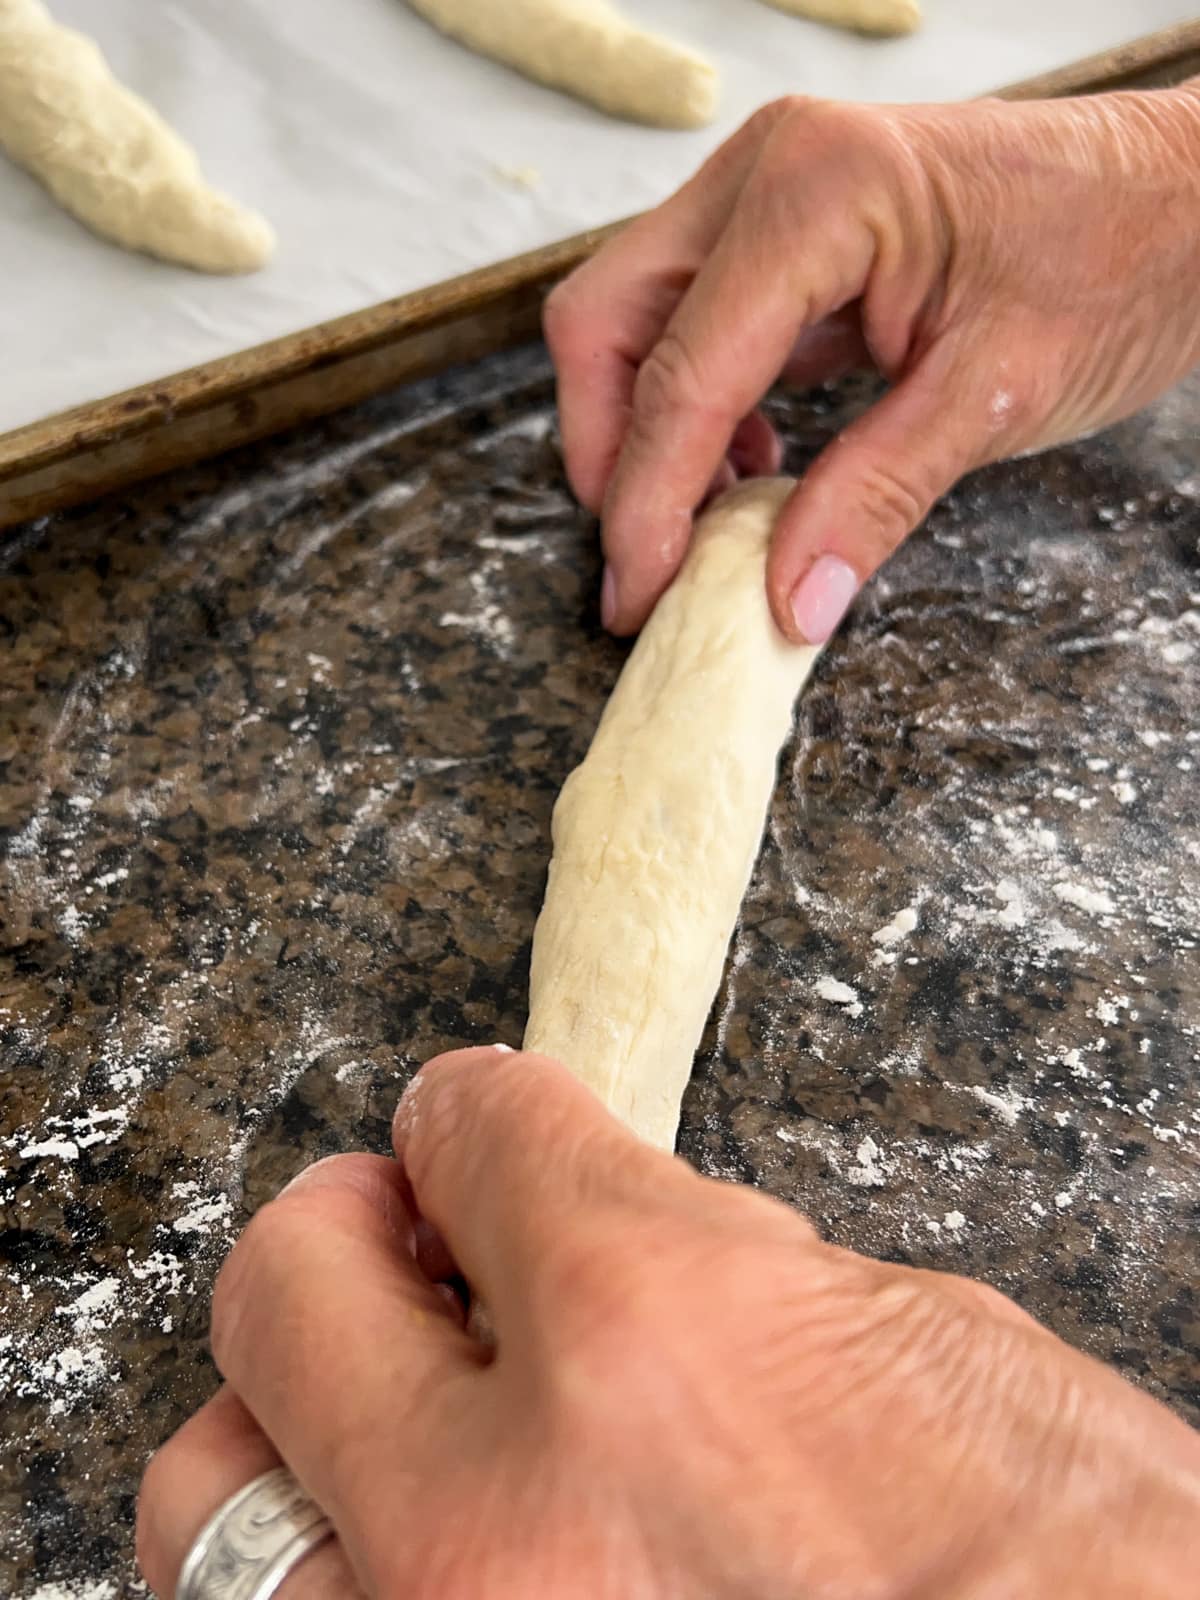 Piece of dough being rolled into a log to make breadsticks.